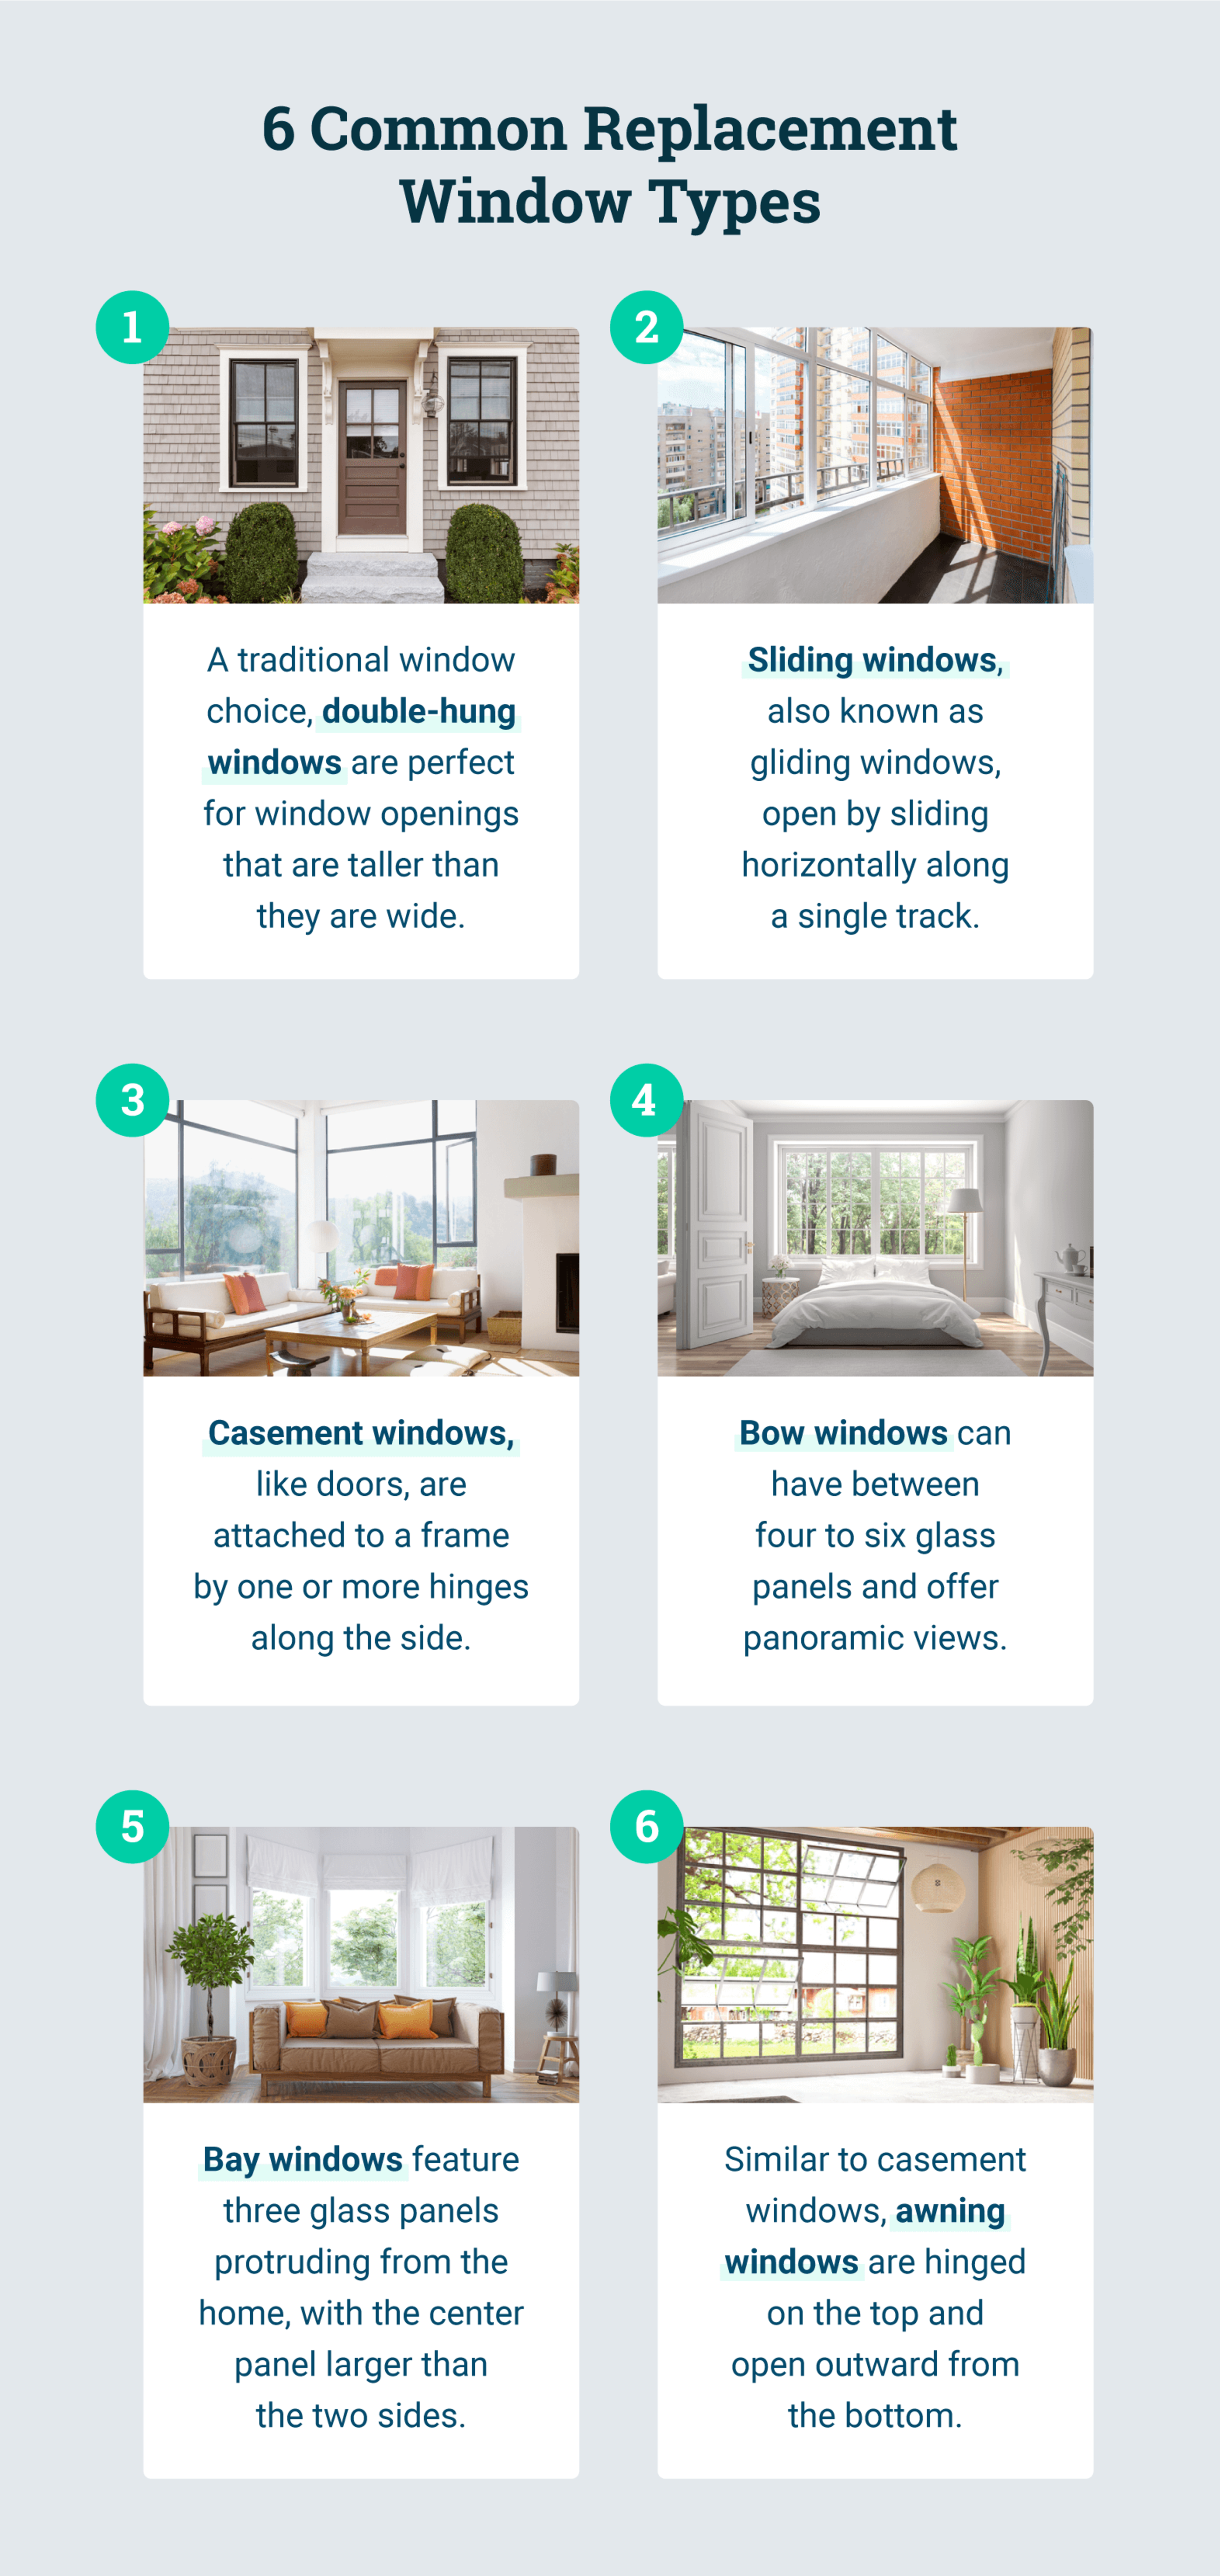 6 Common Types of Replacement Windows